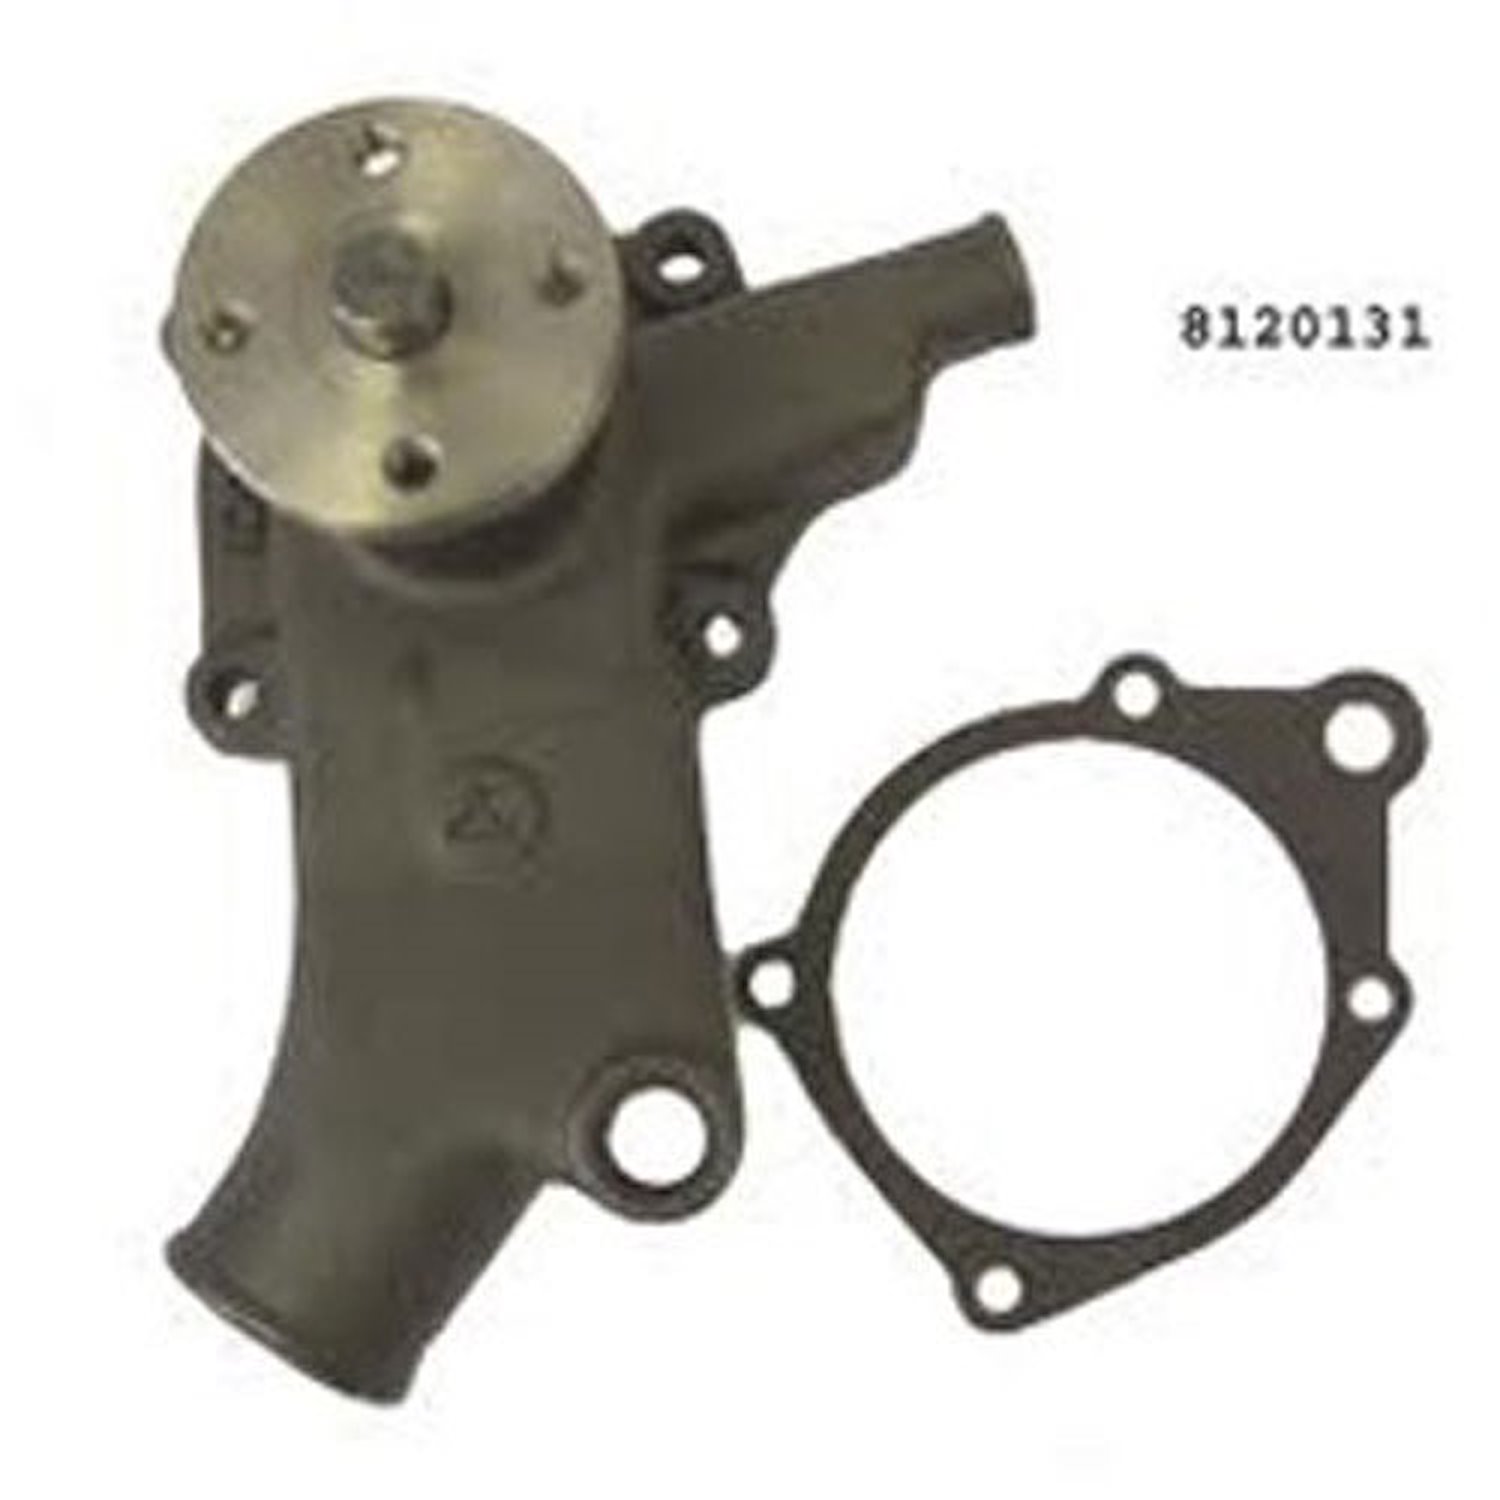 This water pump impeller shaft seal from Omix-ADA fits 41-71 Ford Willys and Jeep models with 134 cubic inch engines.